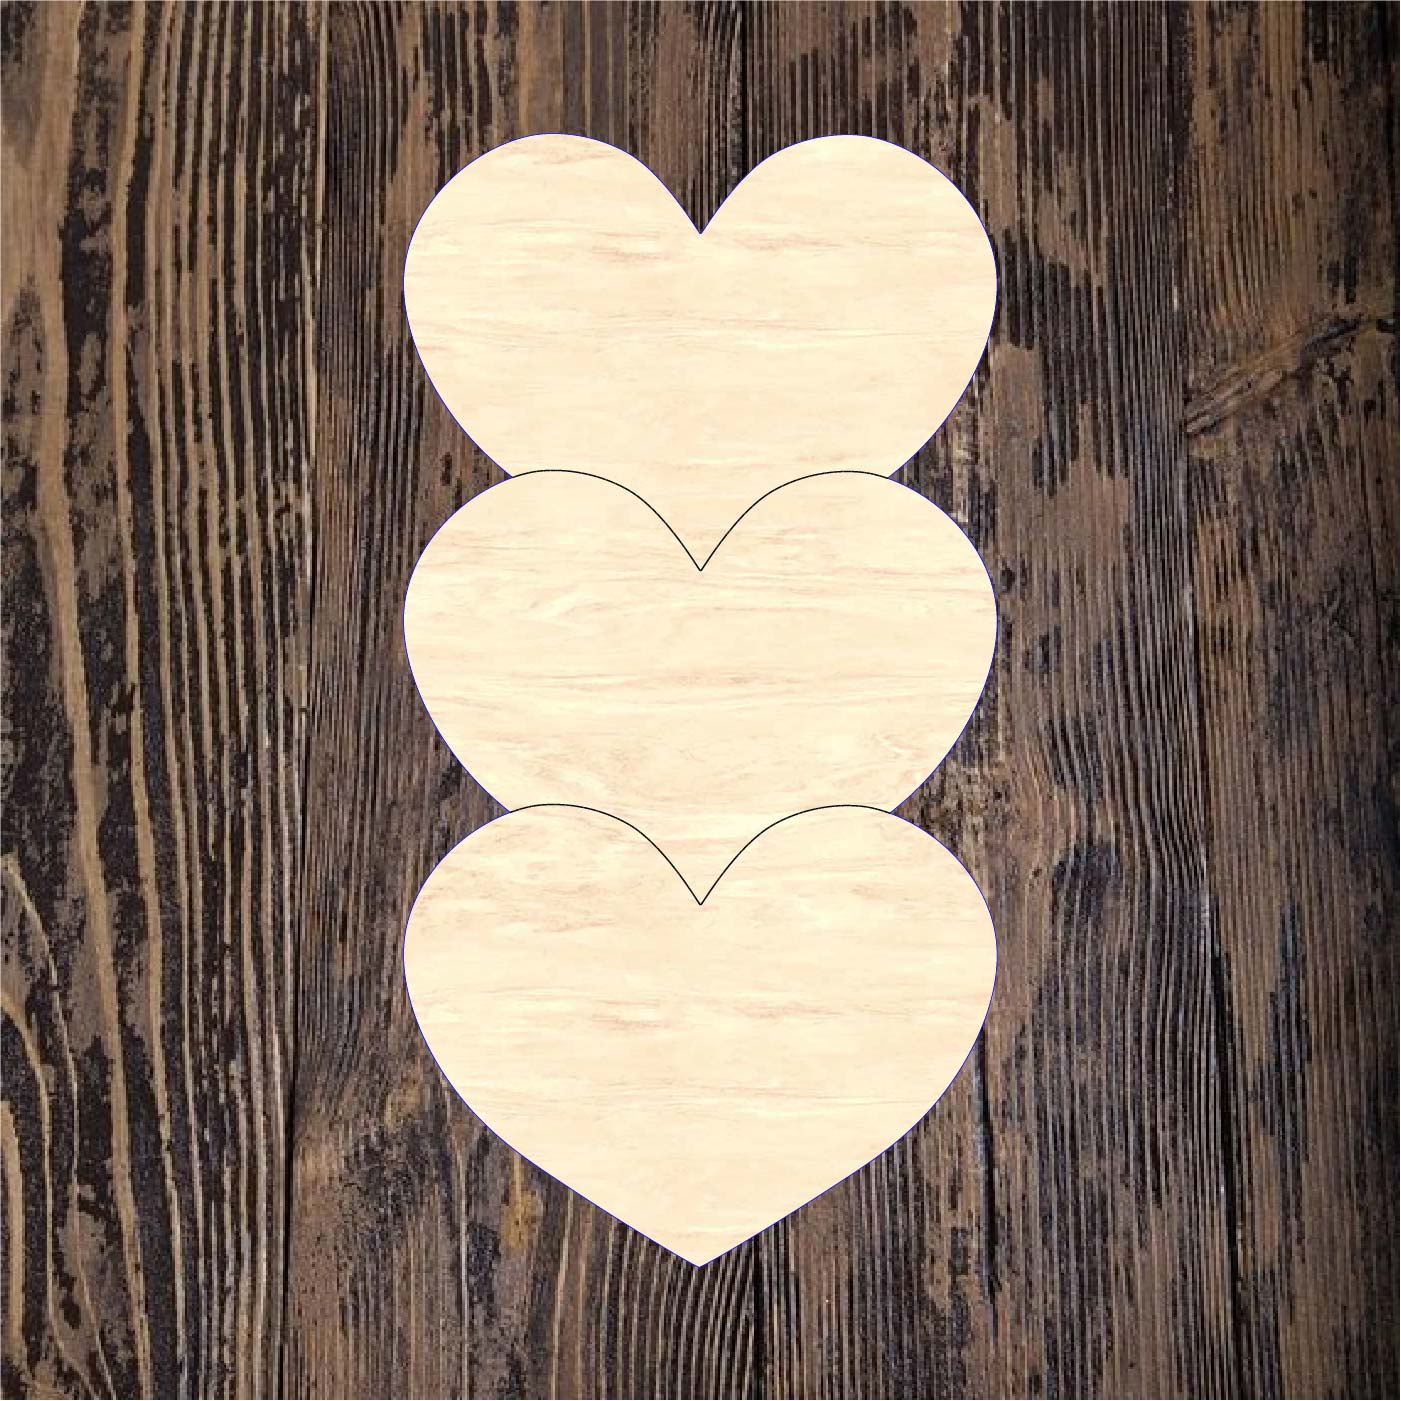 9 inch unfinished Wood Heart